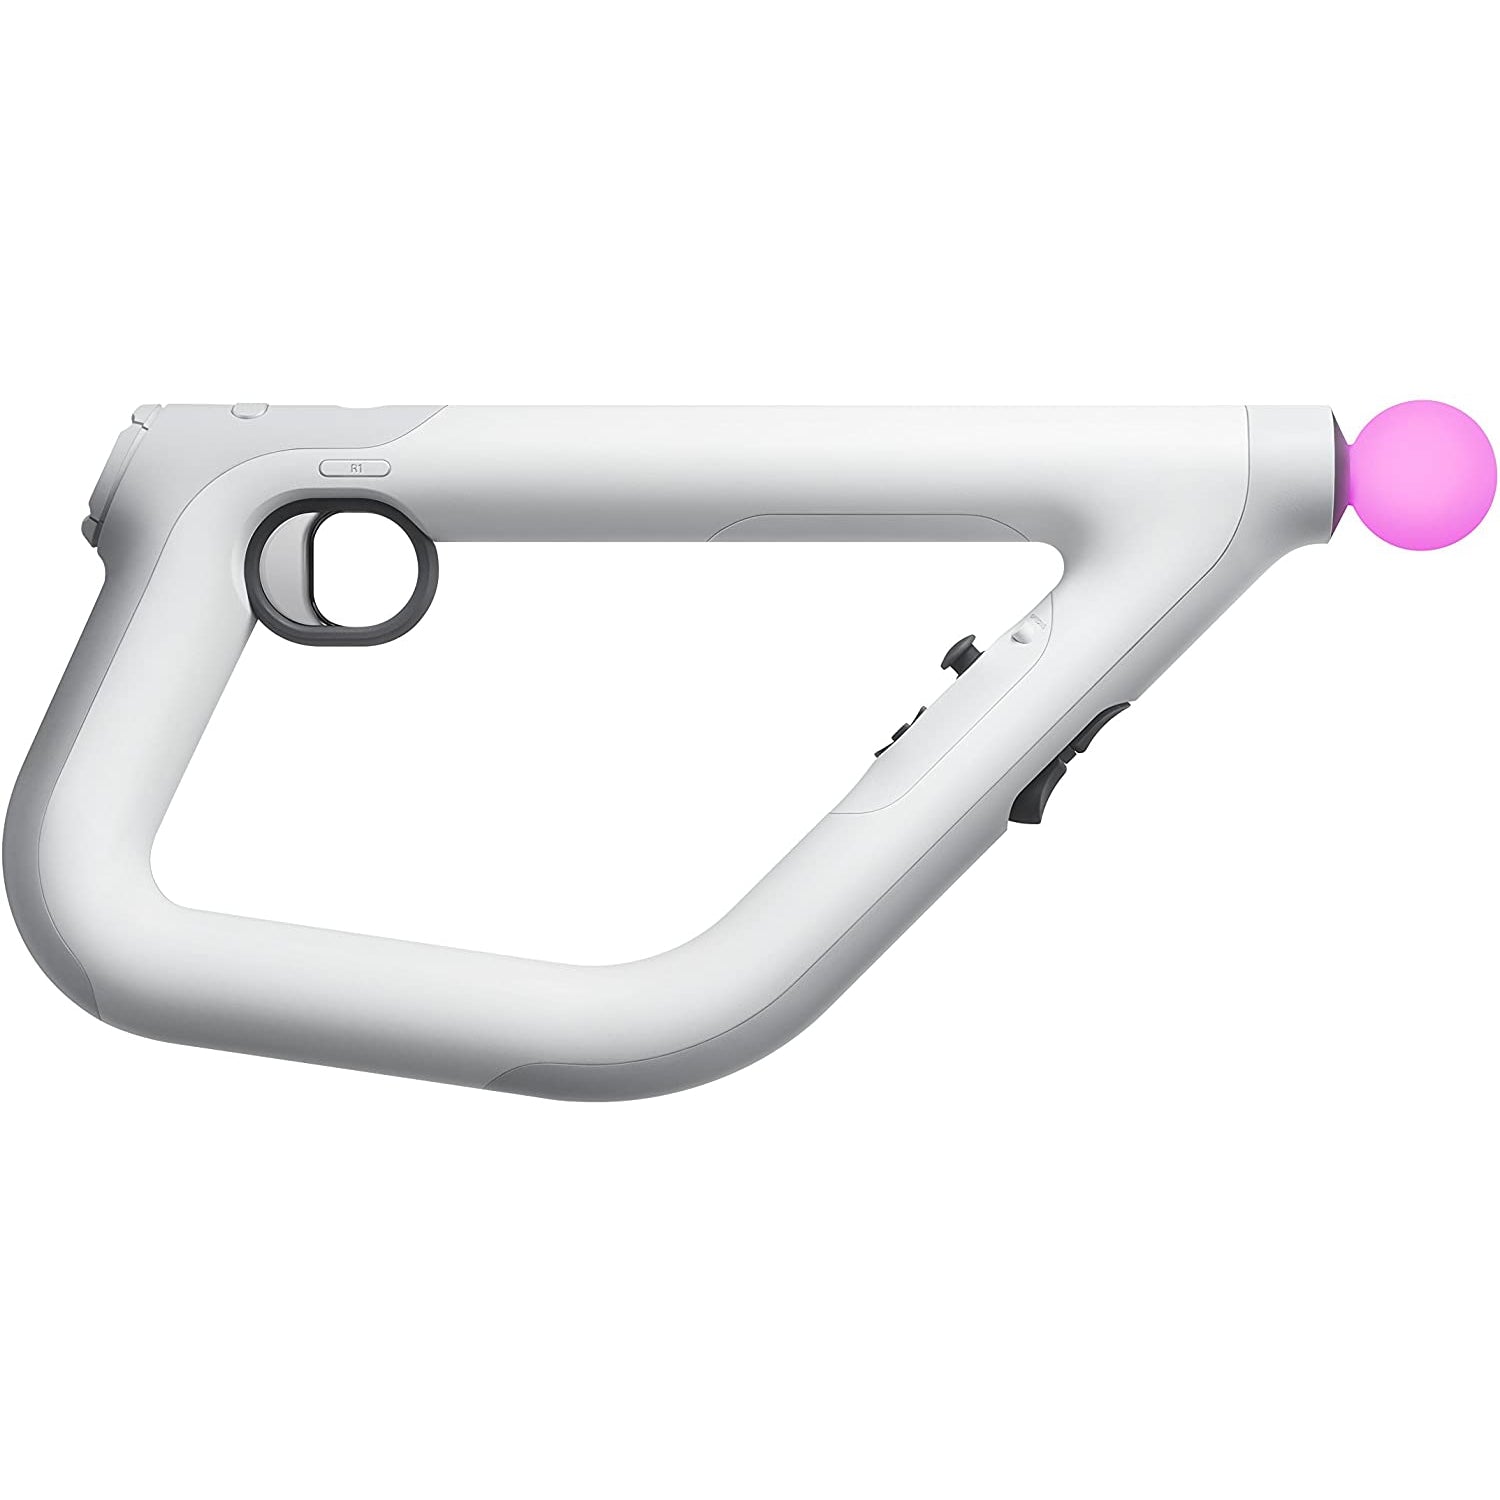 PlayStation VR Aim Controller (PS4) - White